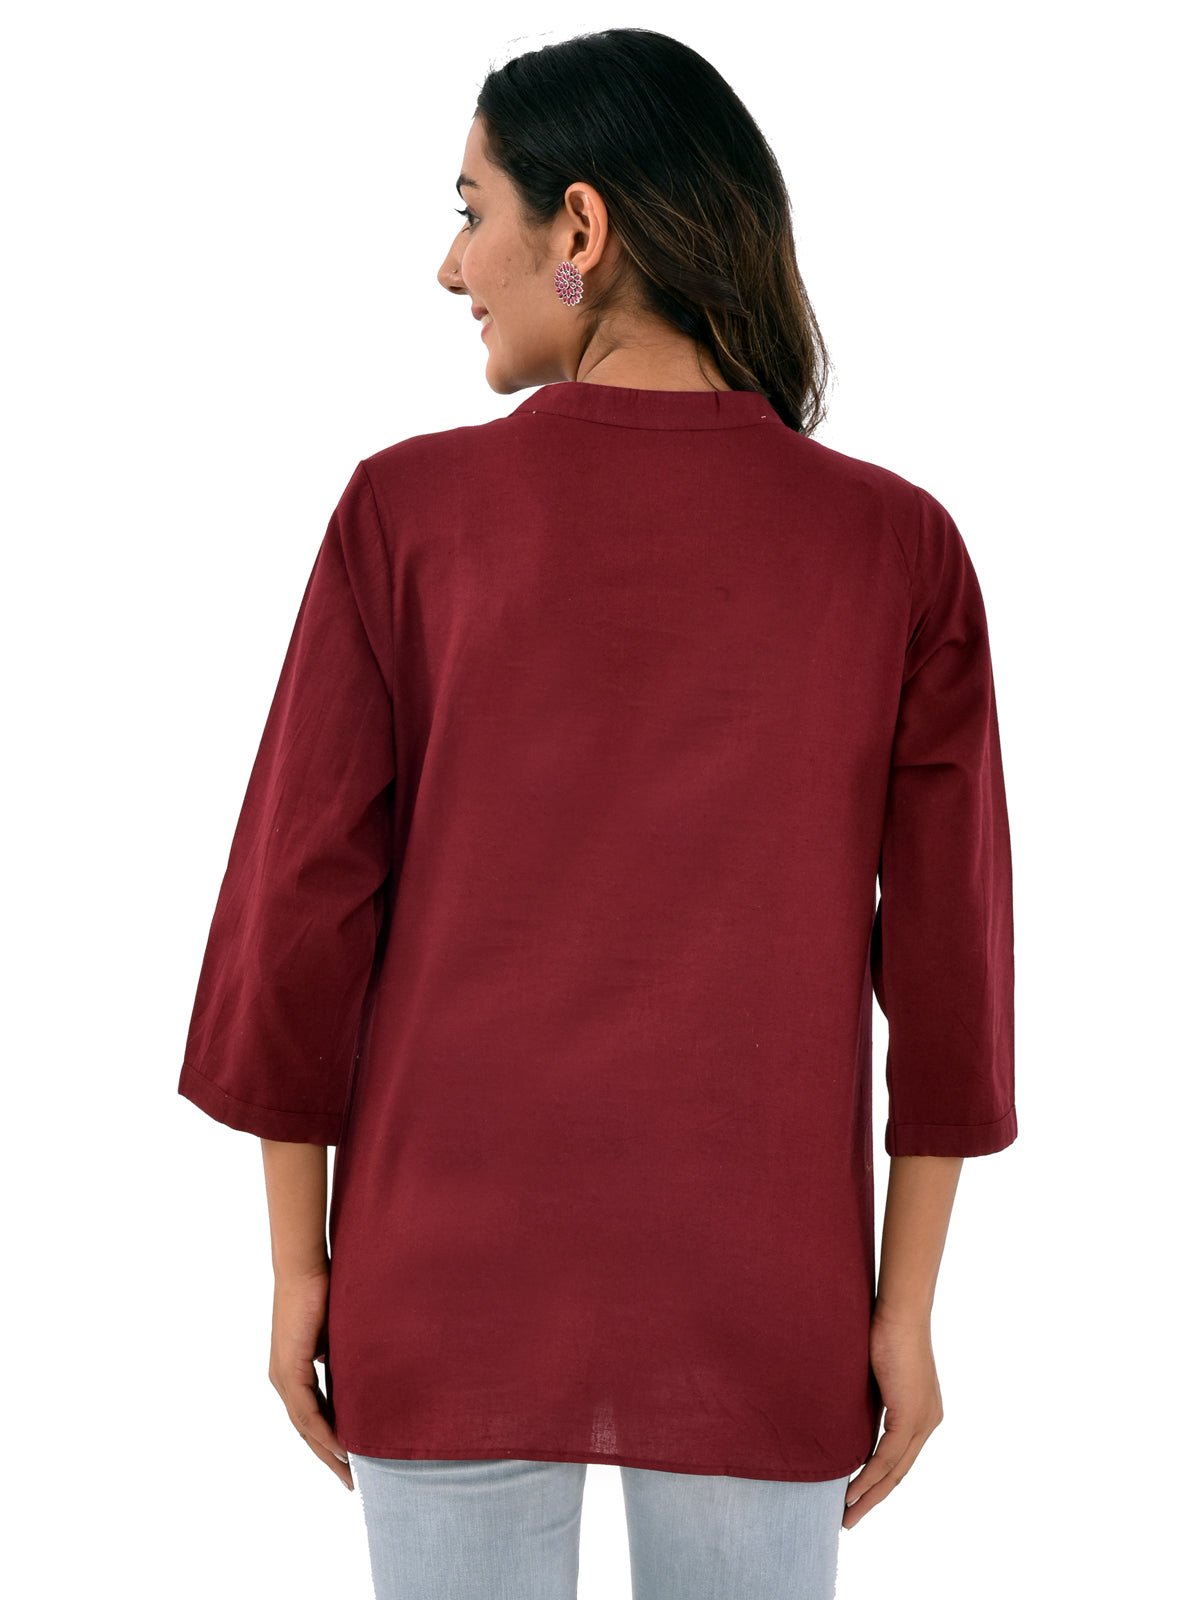 Womens Casual Three Fourth Sleeves Solid Wine Cotton Tops